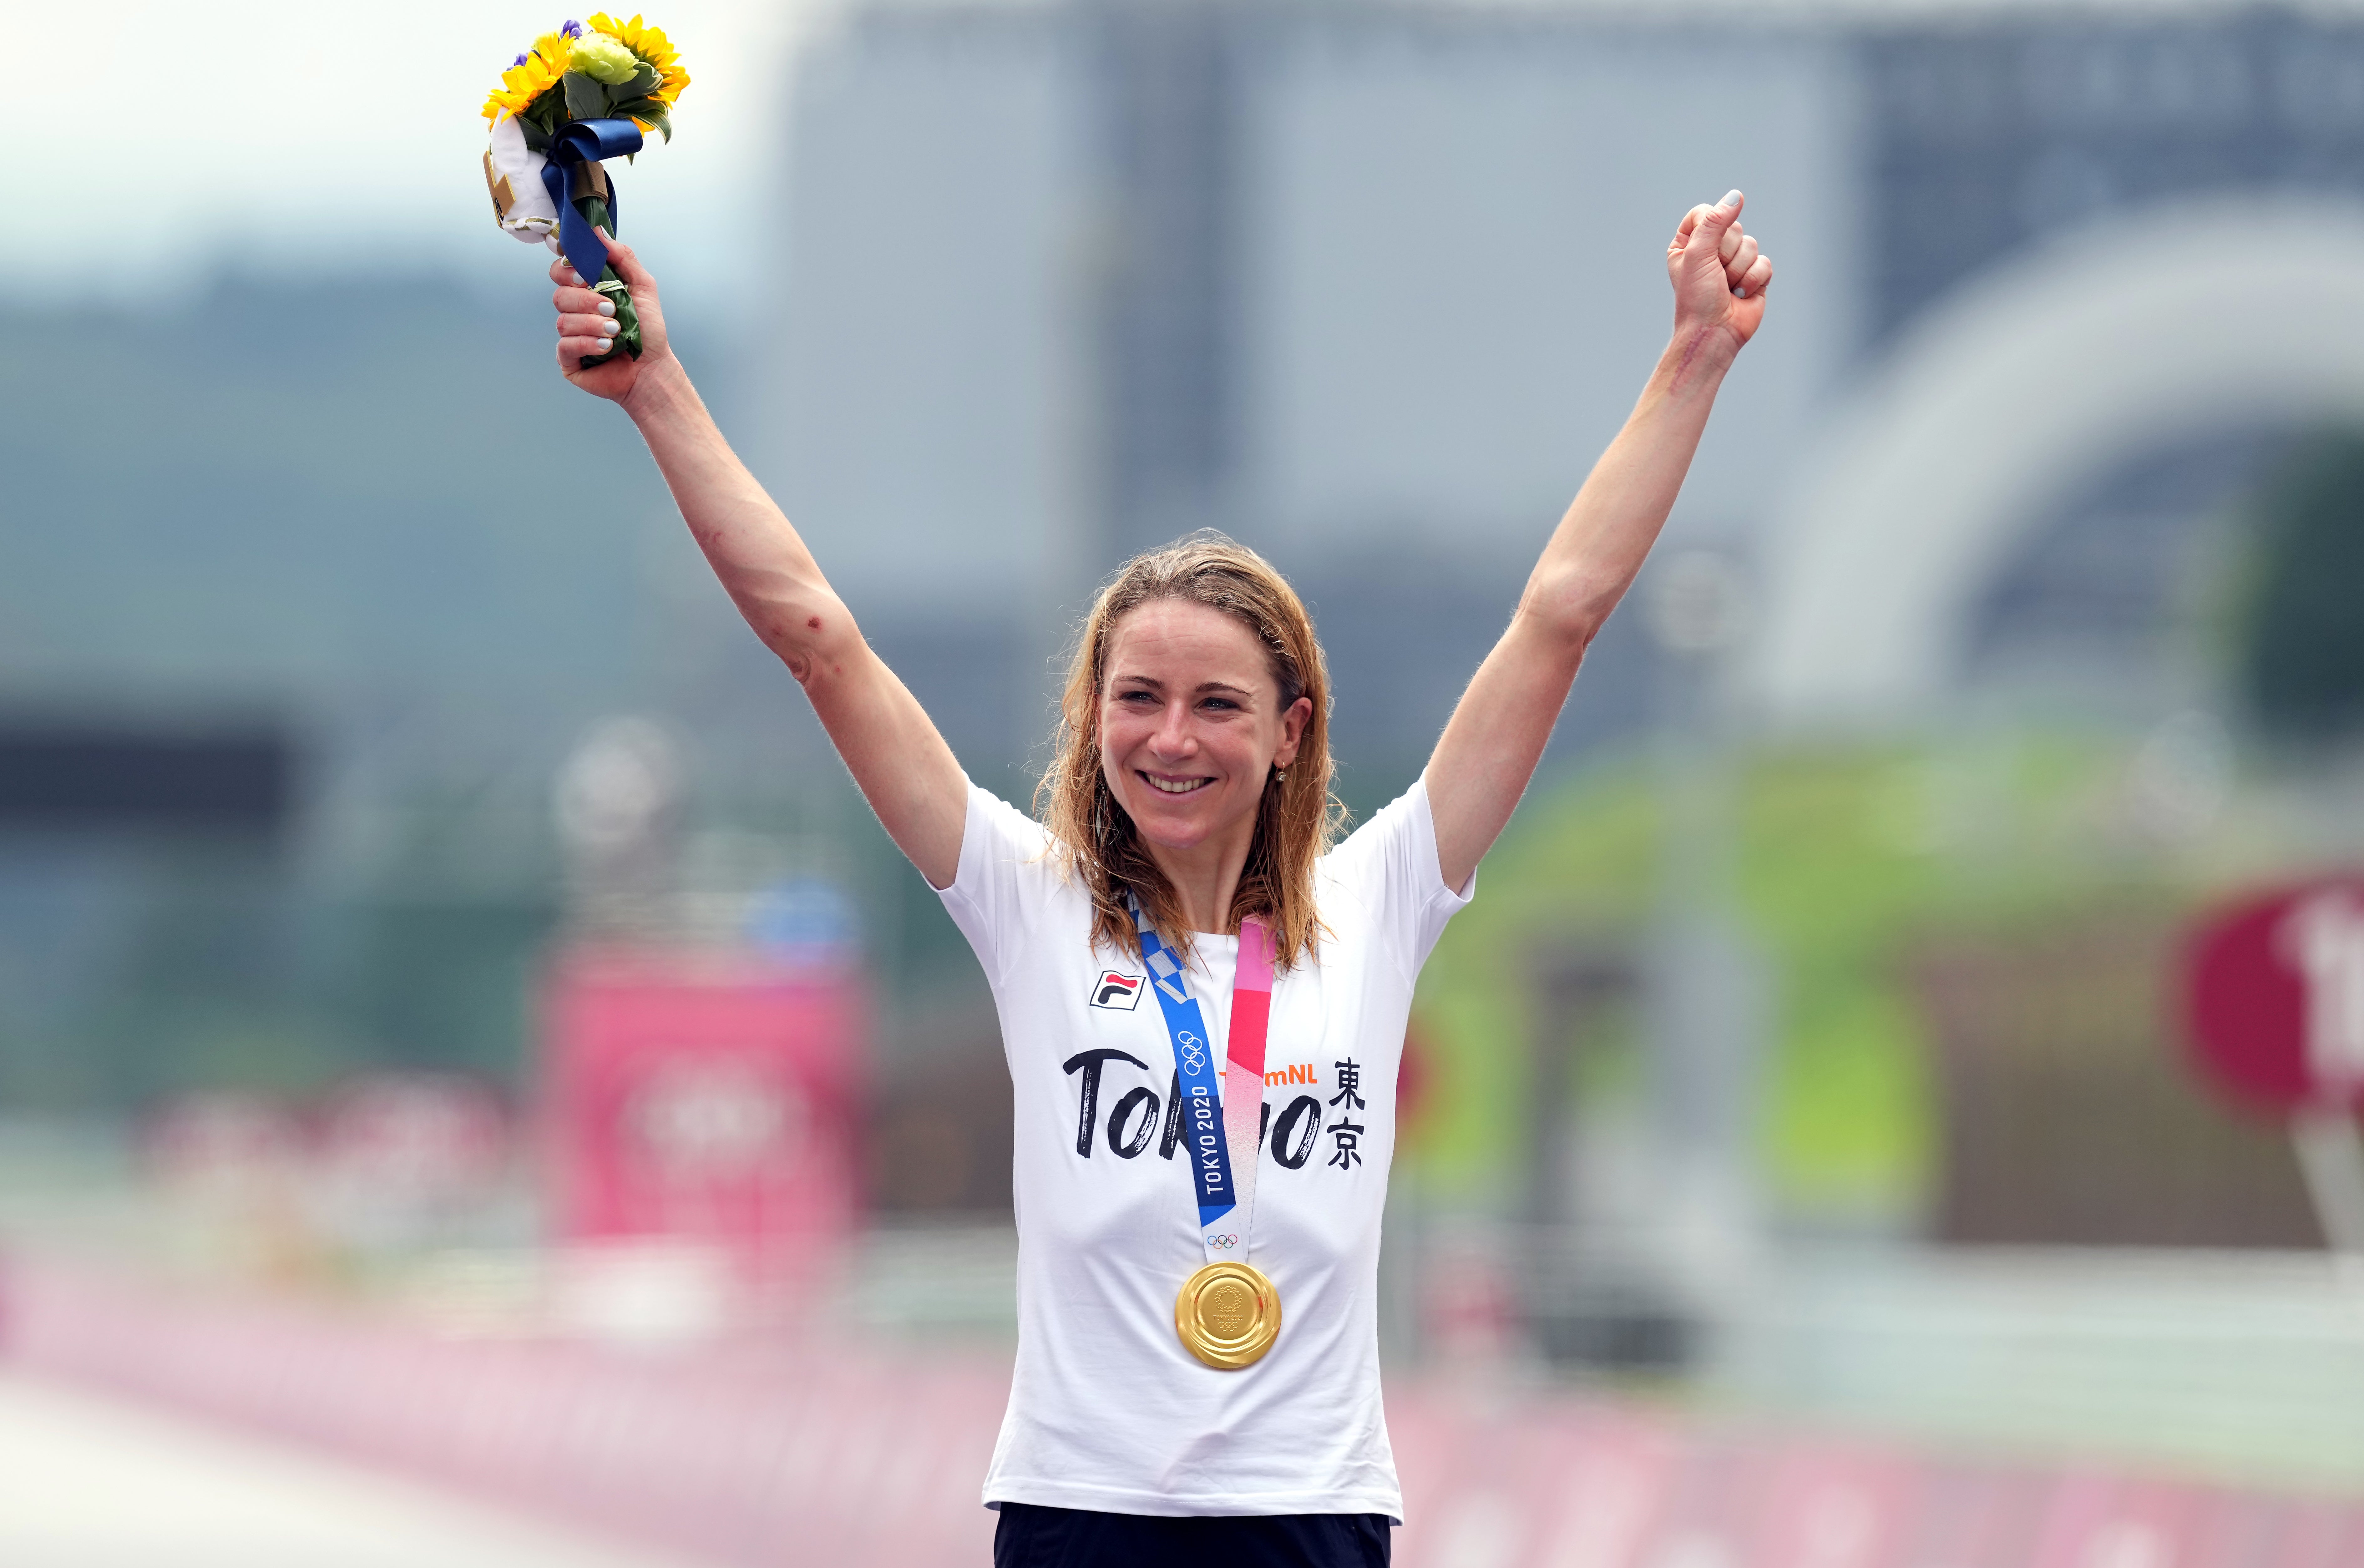 Annemiek van Vleuten celebrated time trial gold after her disappointment in the road race (Martin Rickett/PA)